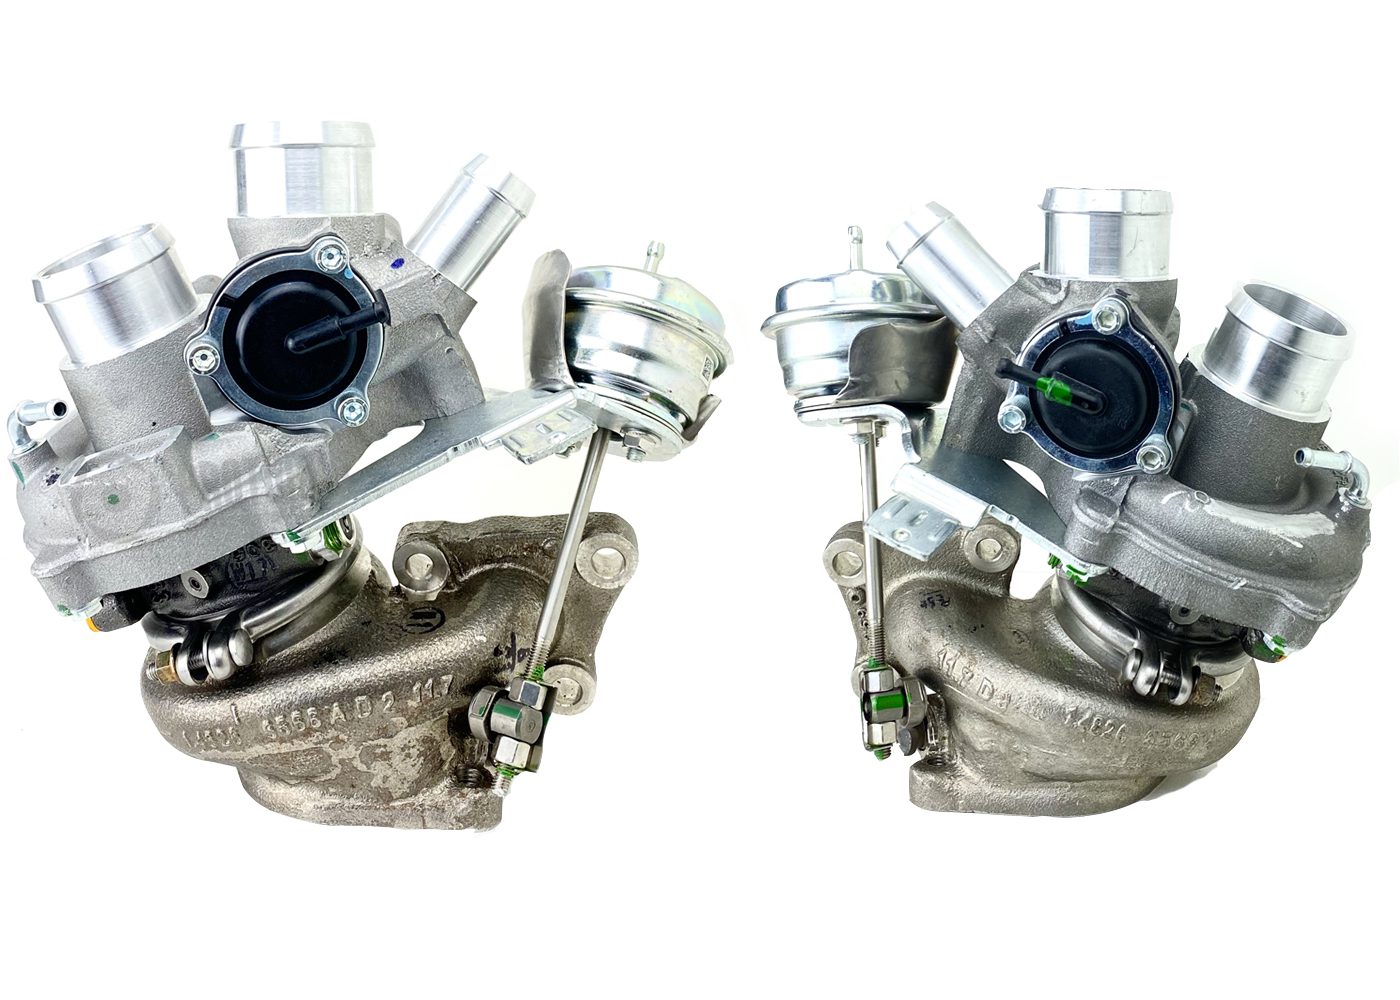 2011-2012 Ford F150 3.5L Ecoboost Stock Replacement Turbo Kit (both)